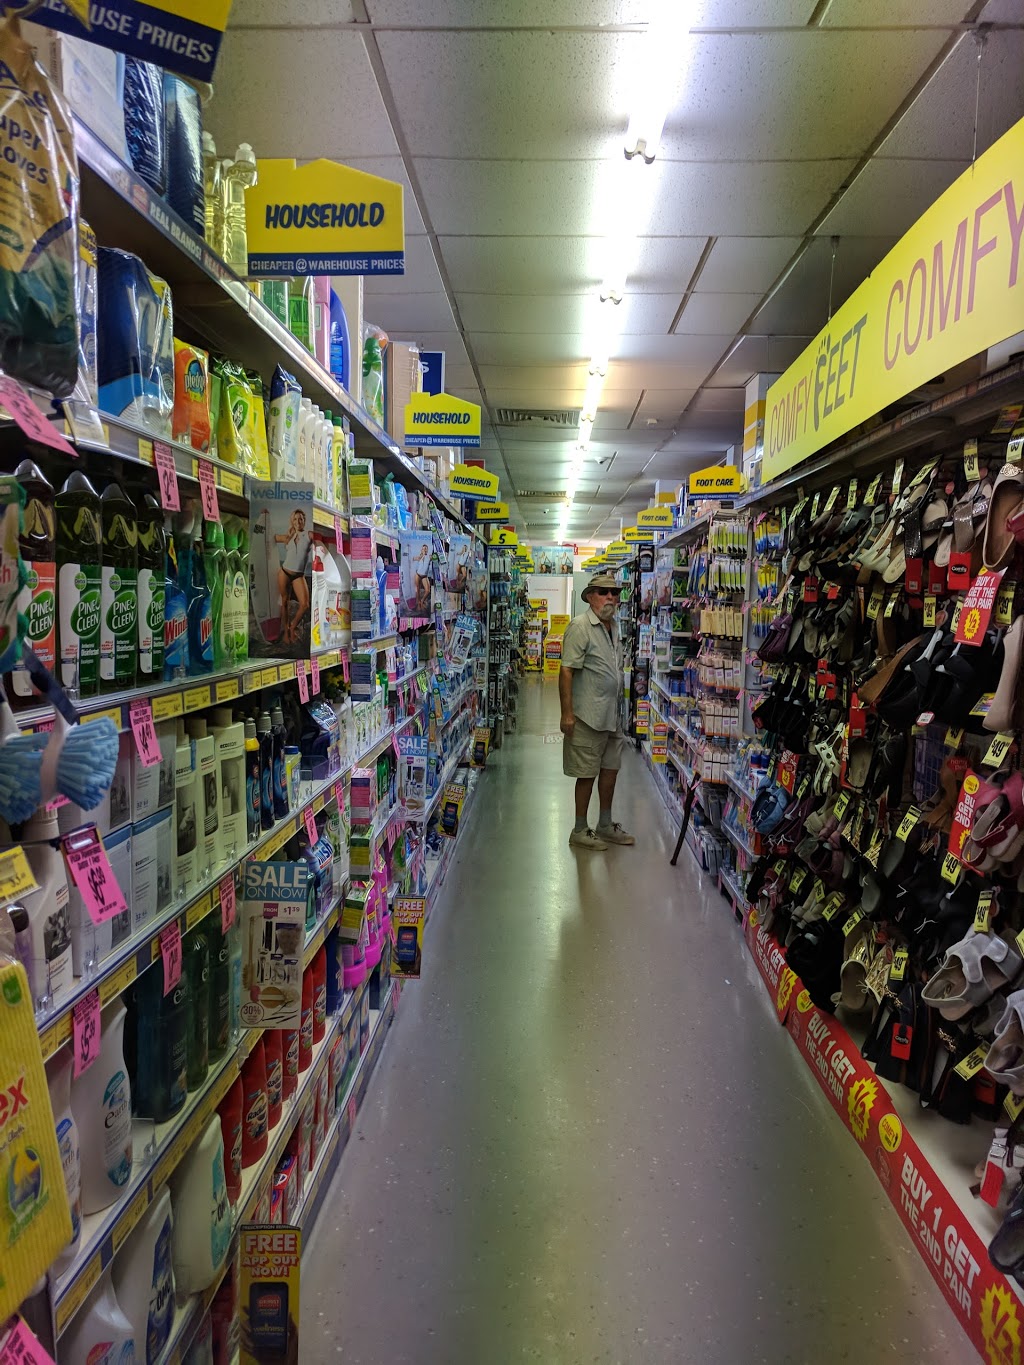 Chemist Warehouse | 179 Redcliffe Parade, Redcliffe QLD 4020, Australia | Phone: (07) 3284 6454